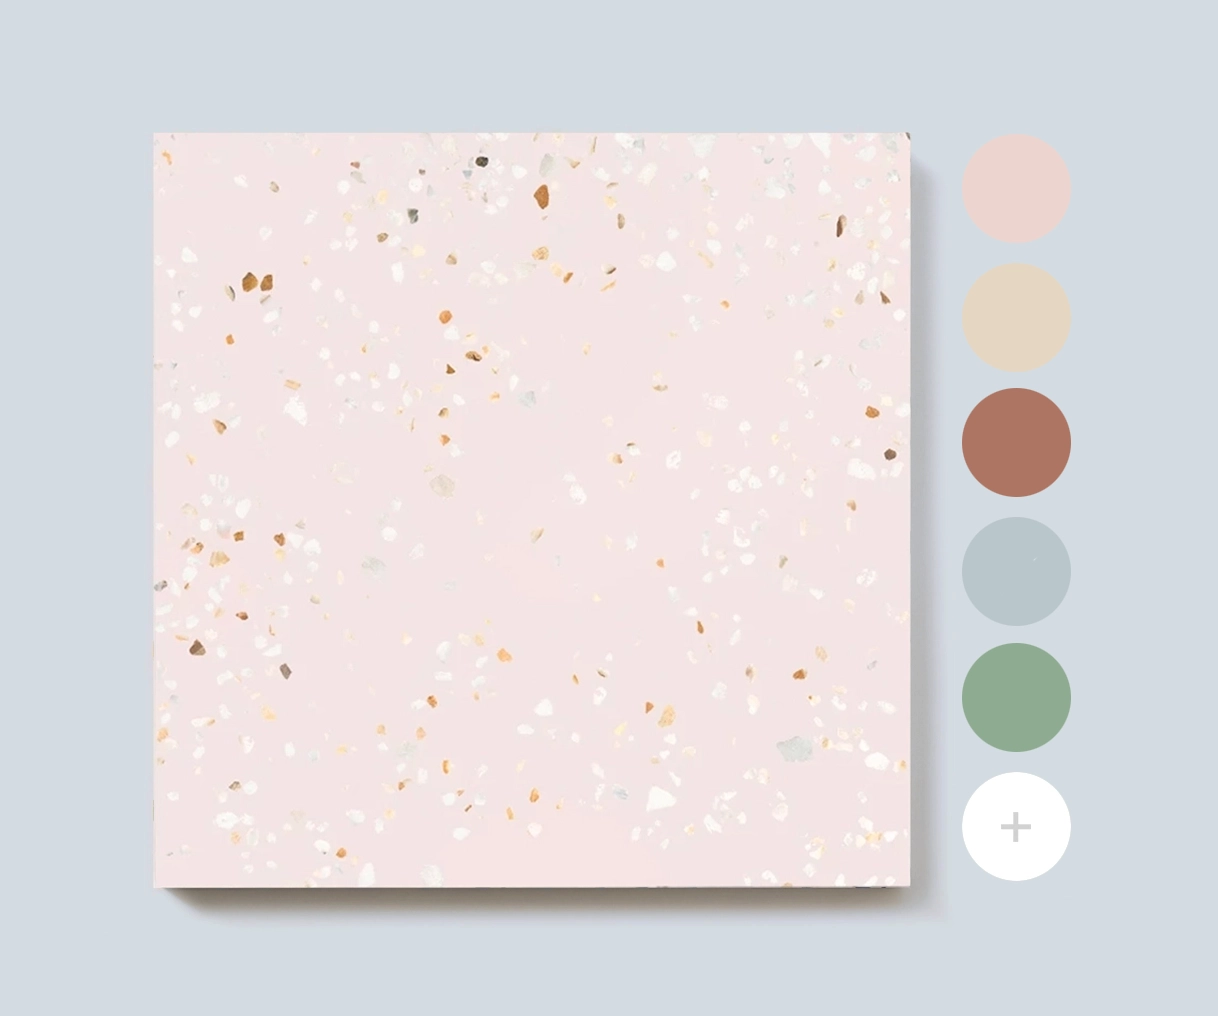 Colorful terrazzo tiles in pink, white, cream, beige and gray